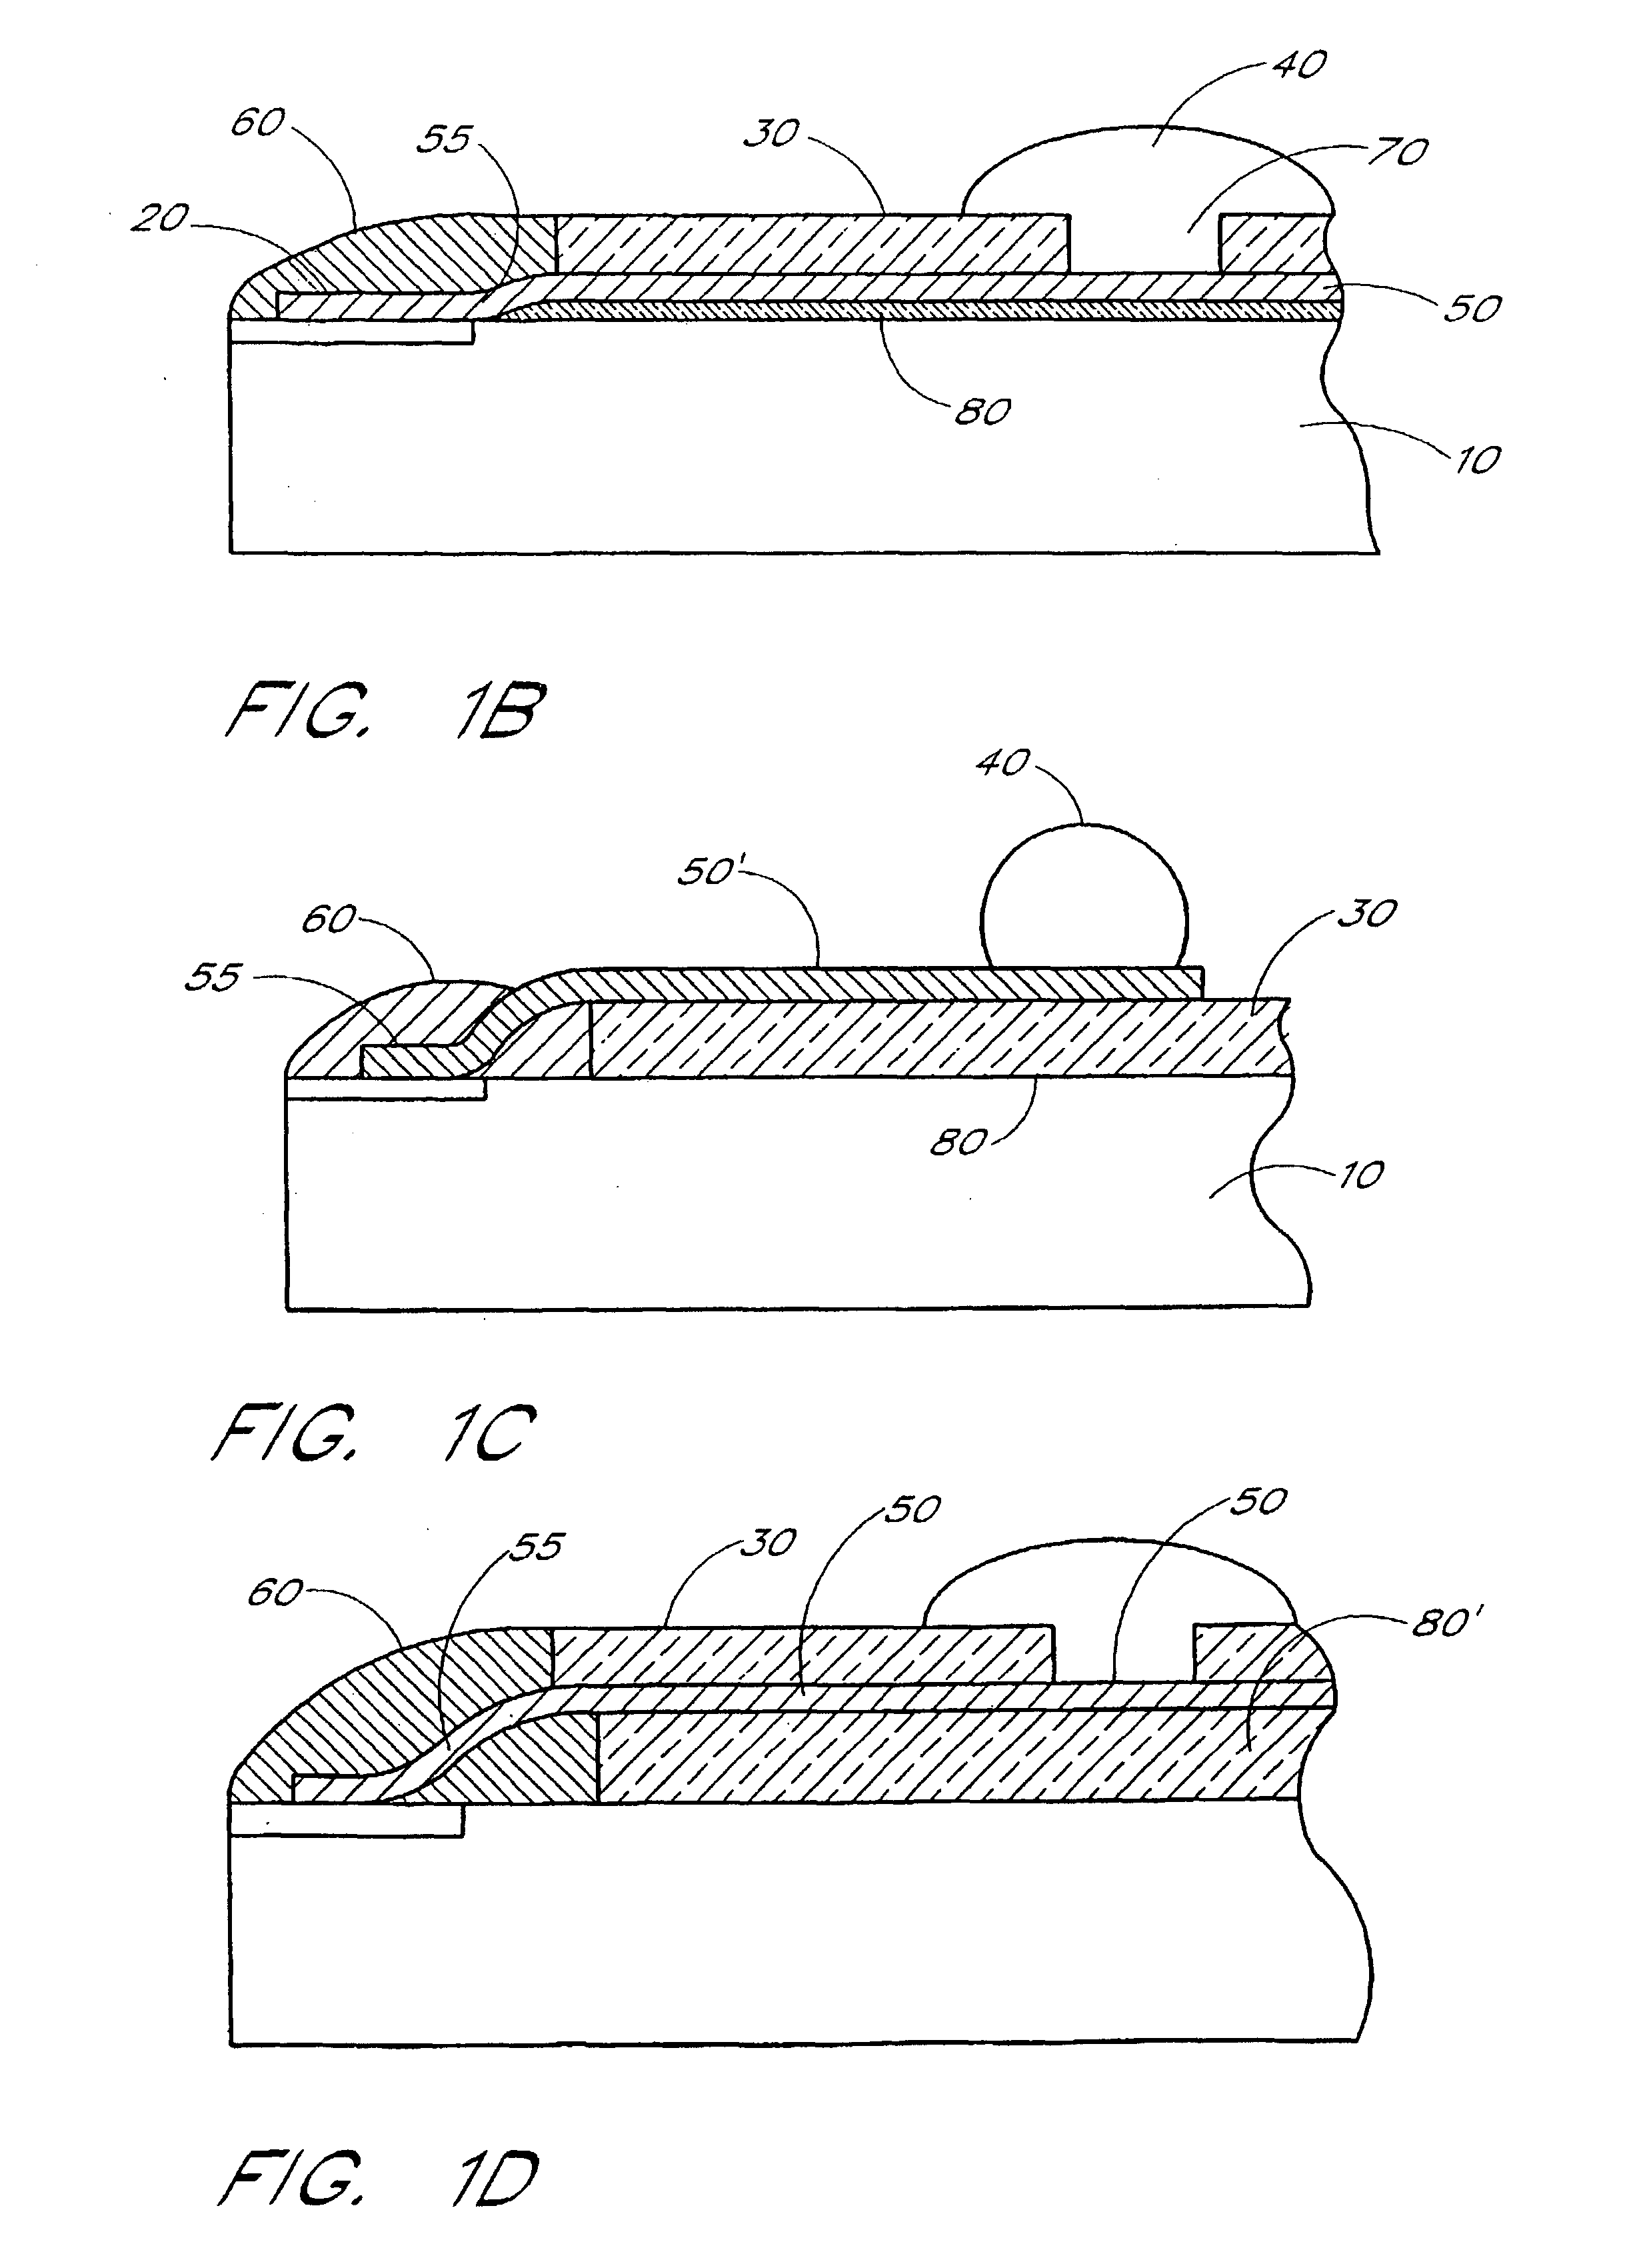 Method of making a flexible substrate with a filler material